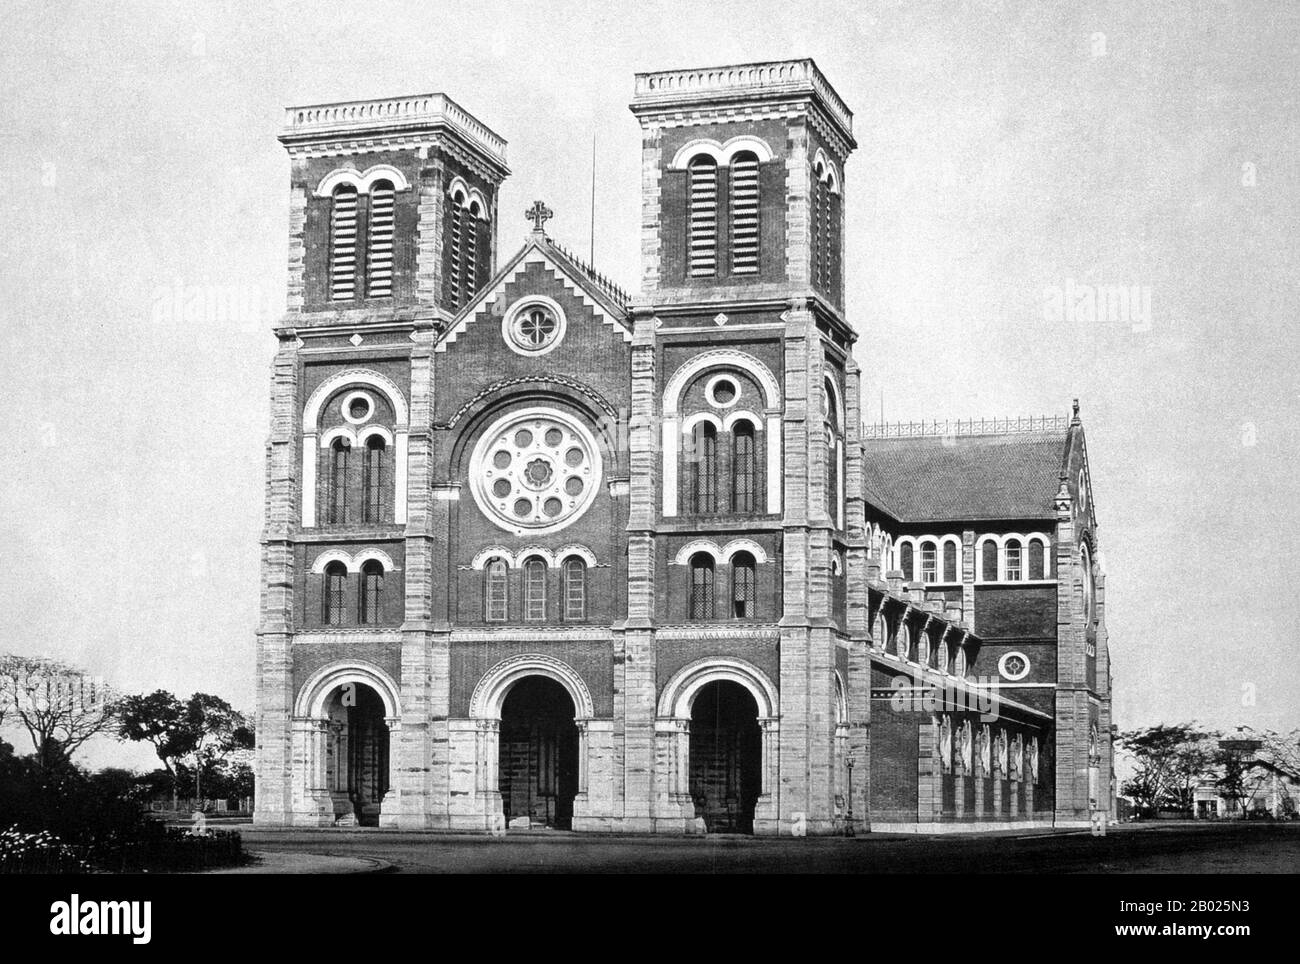 Saigon Notre-Dame Basilica, officially Basilica of Our Lady of The Immaculate Conception is a cathedral located in Ho Chi Minh City (Saigon). Established by French colonists, the cathedral was constructed between 1863 and 1880. It has two bell towers, reaching a height of 58 meters (190 feet).  Former Emperor Bảo Đại made Saigon the capital of the State of Vietnam in 1949 with himself as head of state. After the Việt Minh gained control of North Vietnam in 1954, it became common to refer to the Saigon government as 'South Vietnam'.  The government was renamed the Republic of Vietnam when Bảo Đ Stock Photo